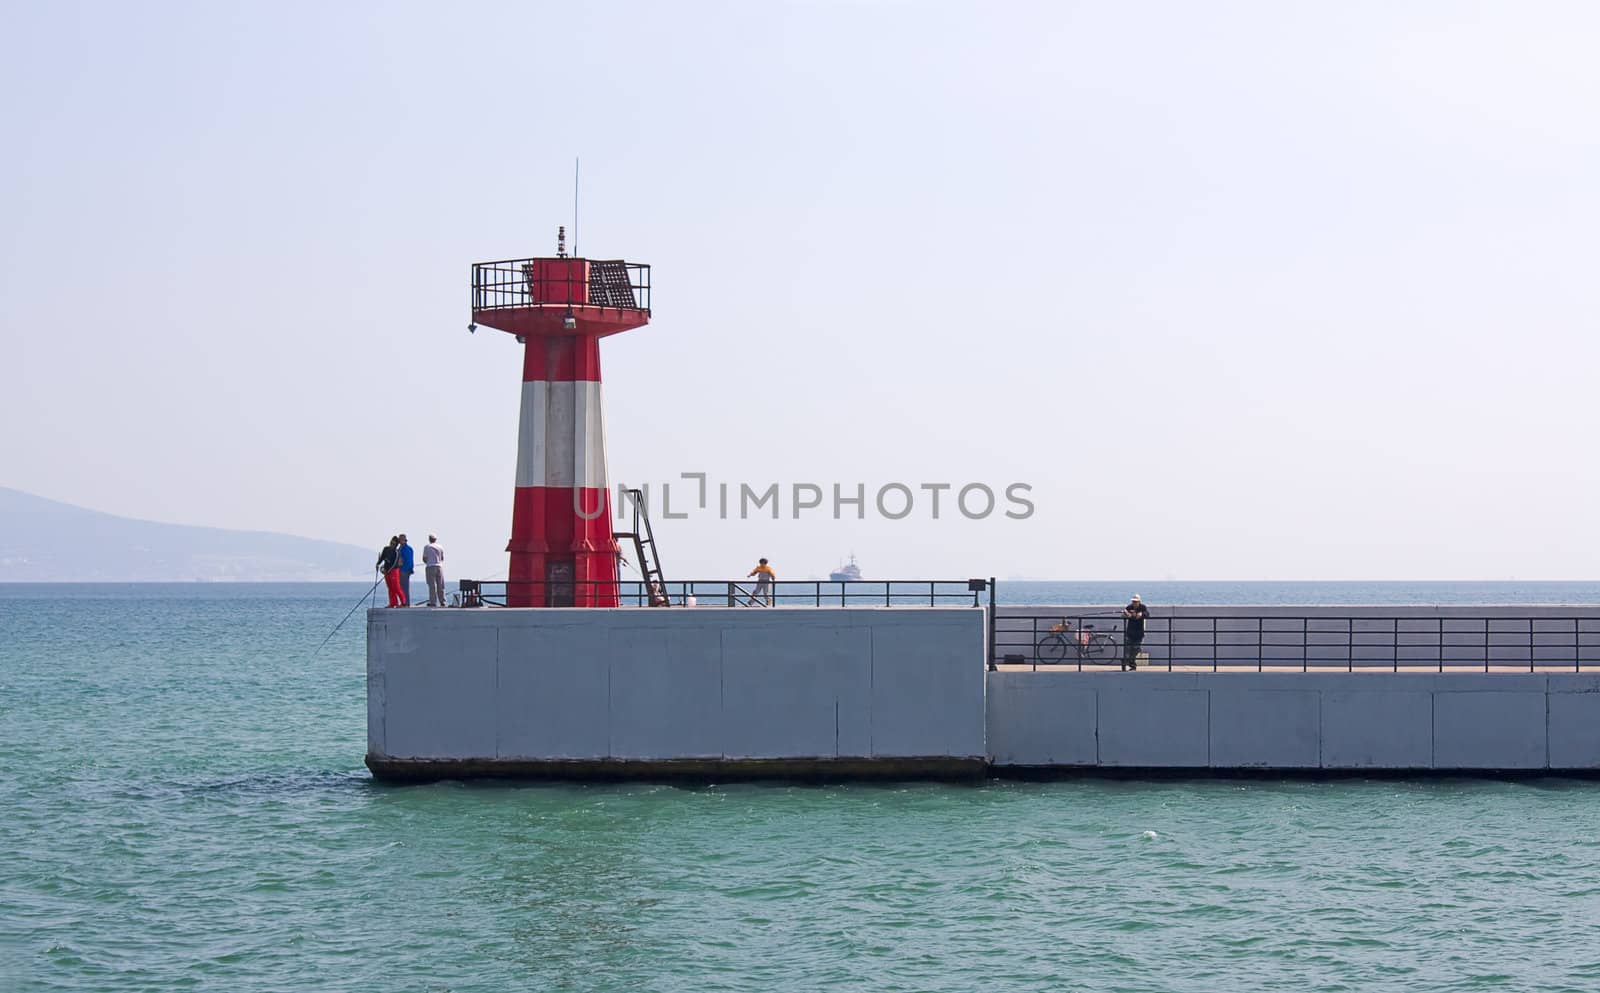 At entrance to port of lighthouse on shores of Black Sea, Novorossiysk, Russia.